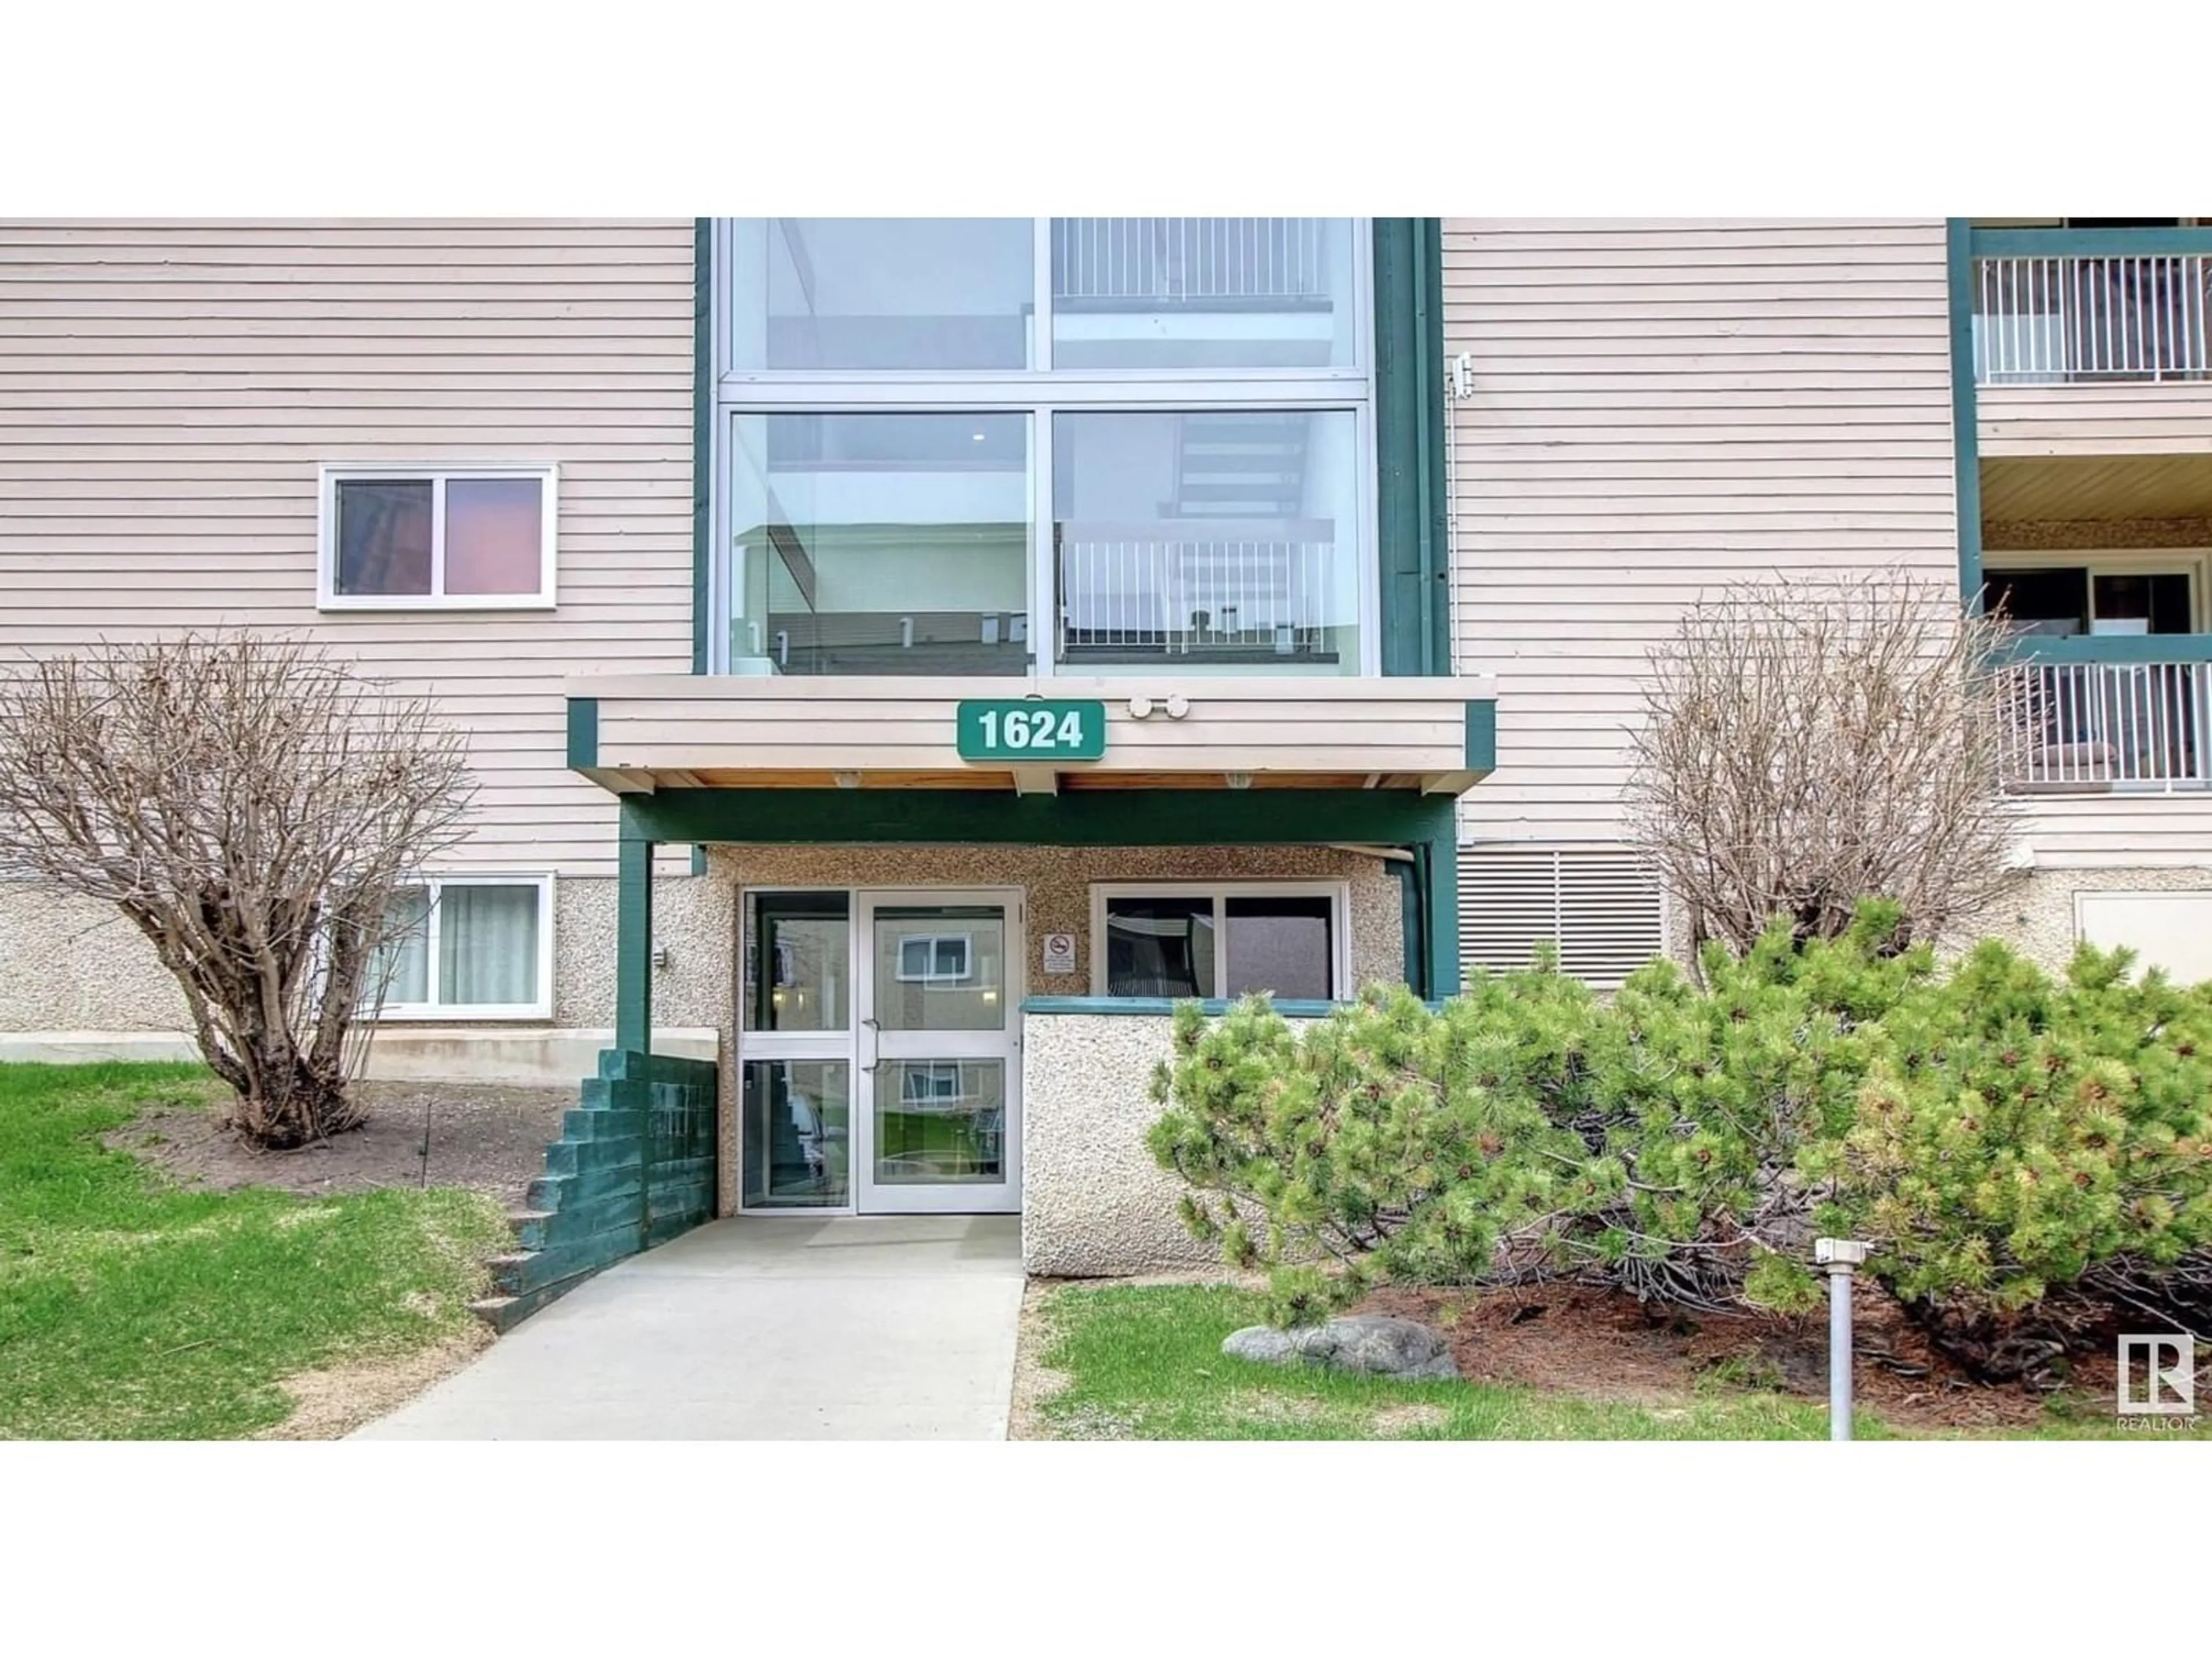 A pic from exterior of the house or condo for #211 1624 48 ST NW, Edmonton Alberta T6L5P1